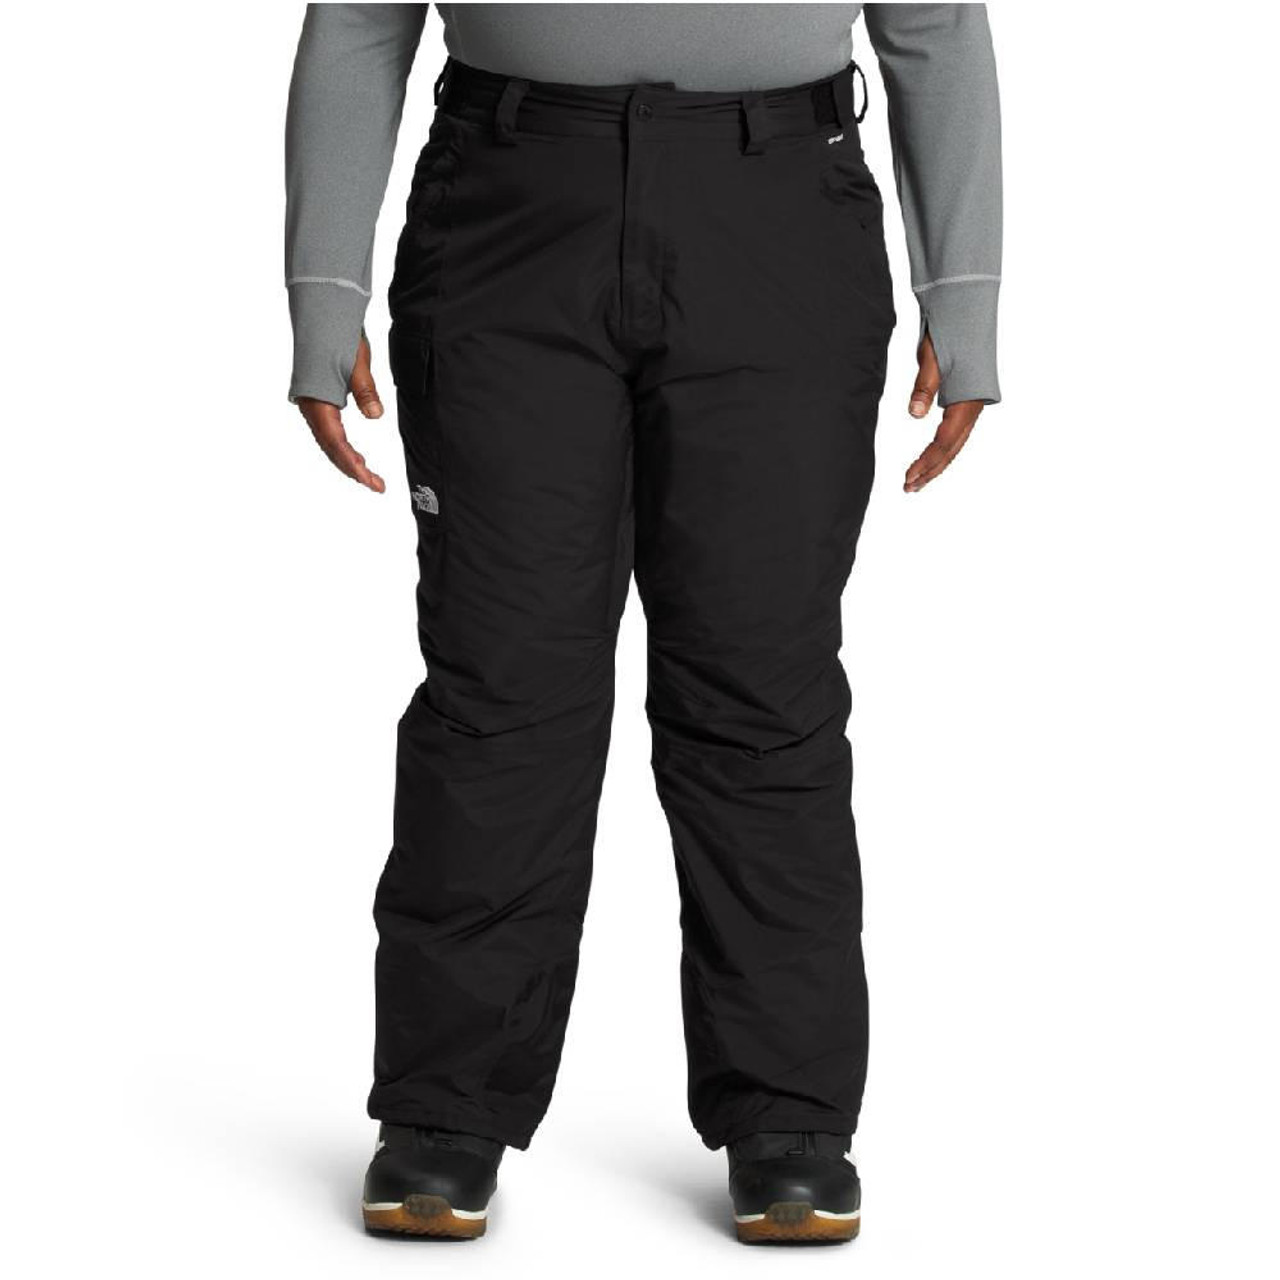 https://cdn11.bigcommerce.com/s-186hk/images/stencil/1280x1280/products/82821/167914/the-north-face-2023-the-north-face-freedom-insulated-plus-womens-tnf-black-pant-short__51048.1706305198.jpg?c=2?imbypass=on